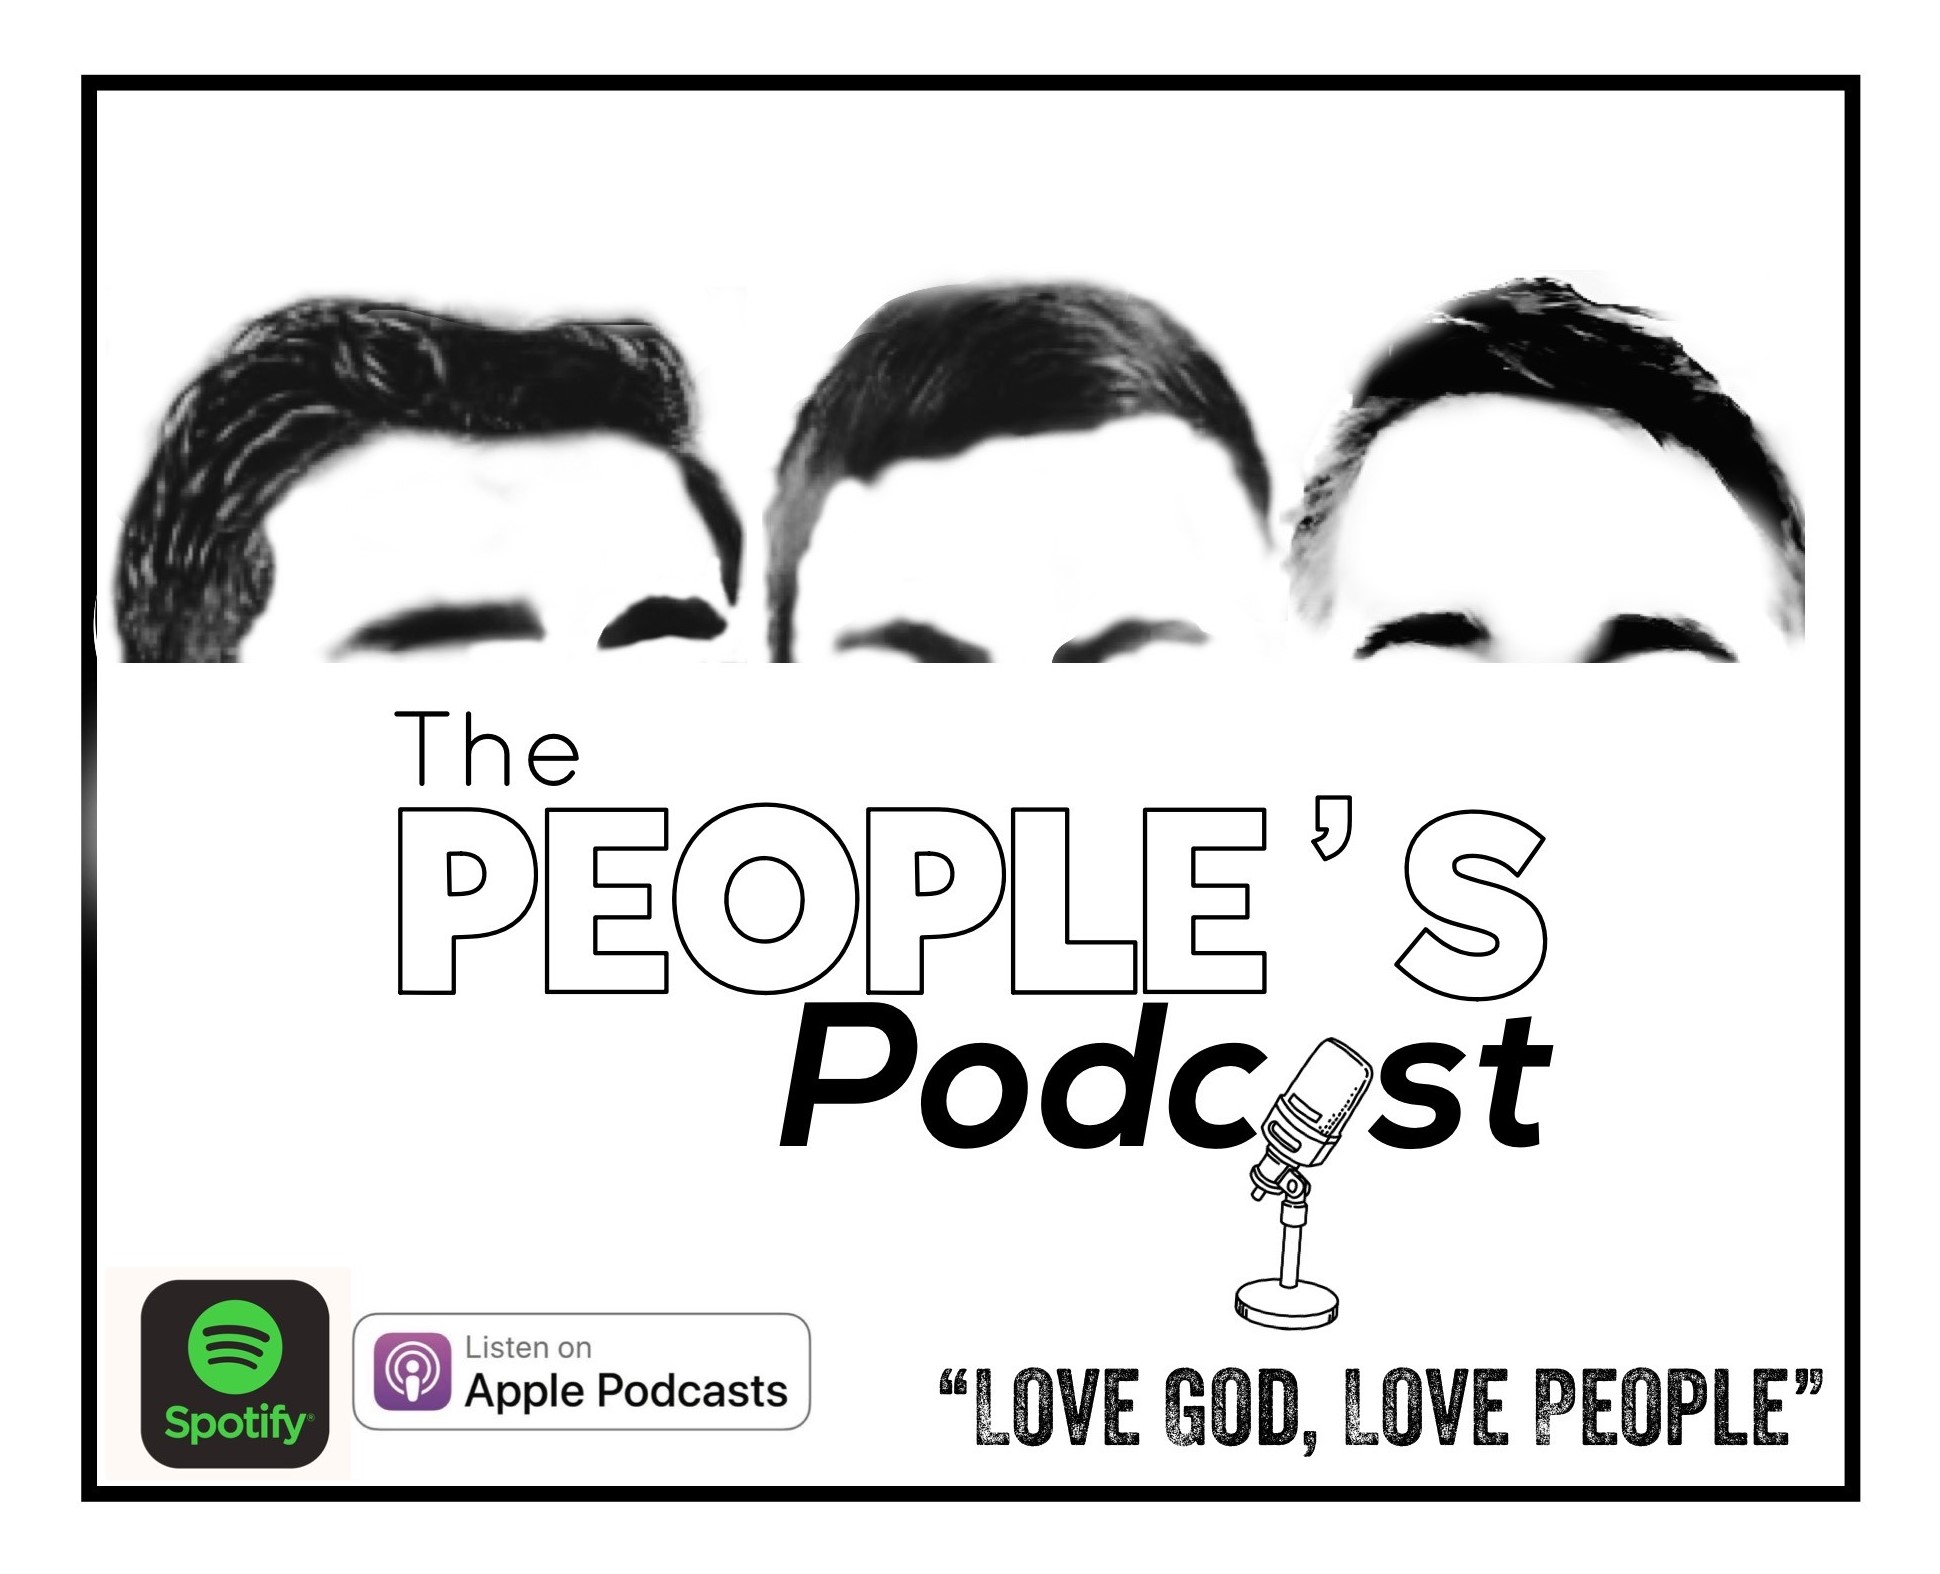 The People's Podcast